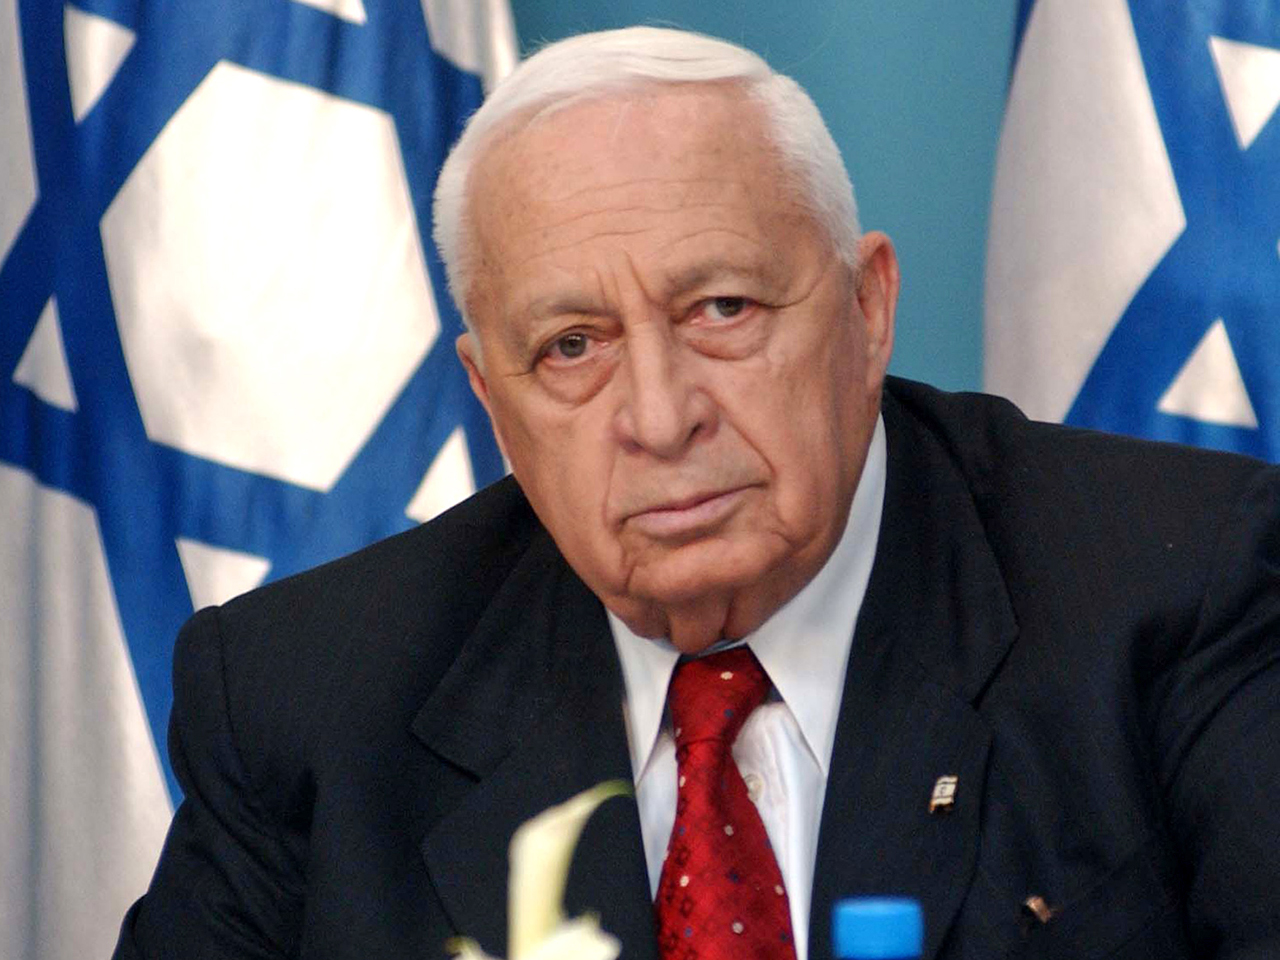 Israeli Prime Minister Ariel Sharon listens to questions from the media during an impromptu news conference at his office in Jerusalem Wednesday April 21, 2004. (AP Photo/Alex Kolomoisky) ** ISRAEL OUT **